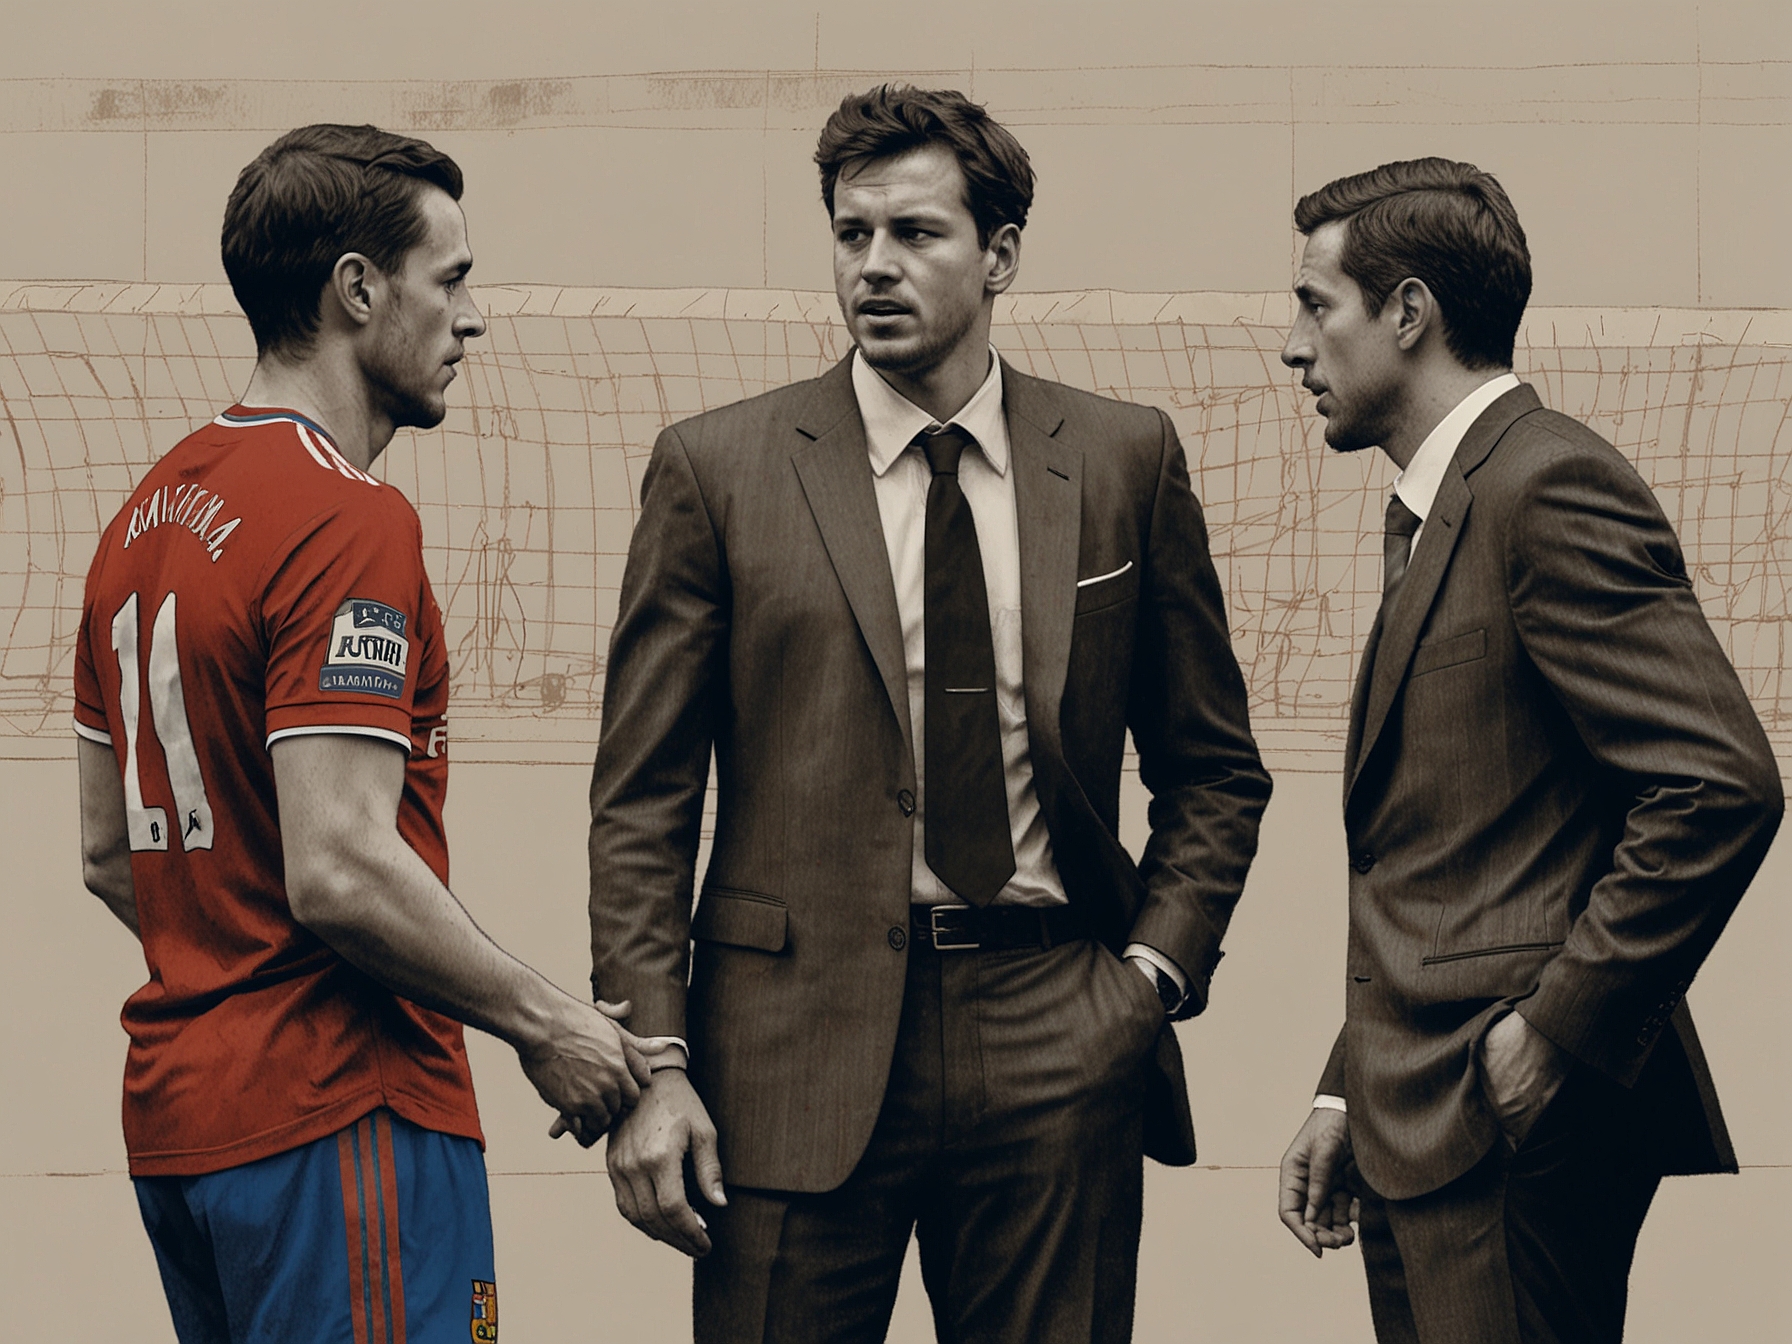 A tense negotiation scene between representatives of Manchester United and Barcelona, depicting the high-stakes battle to secure the transfer of a talented Dutch footballer.